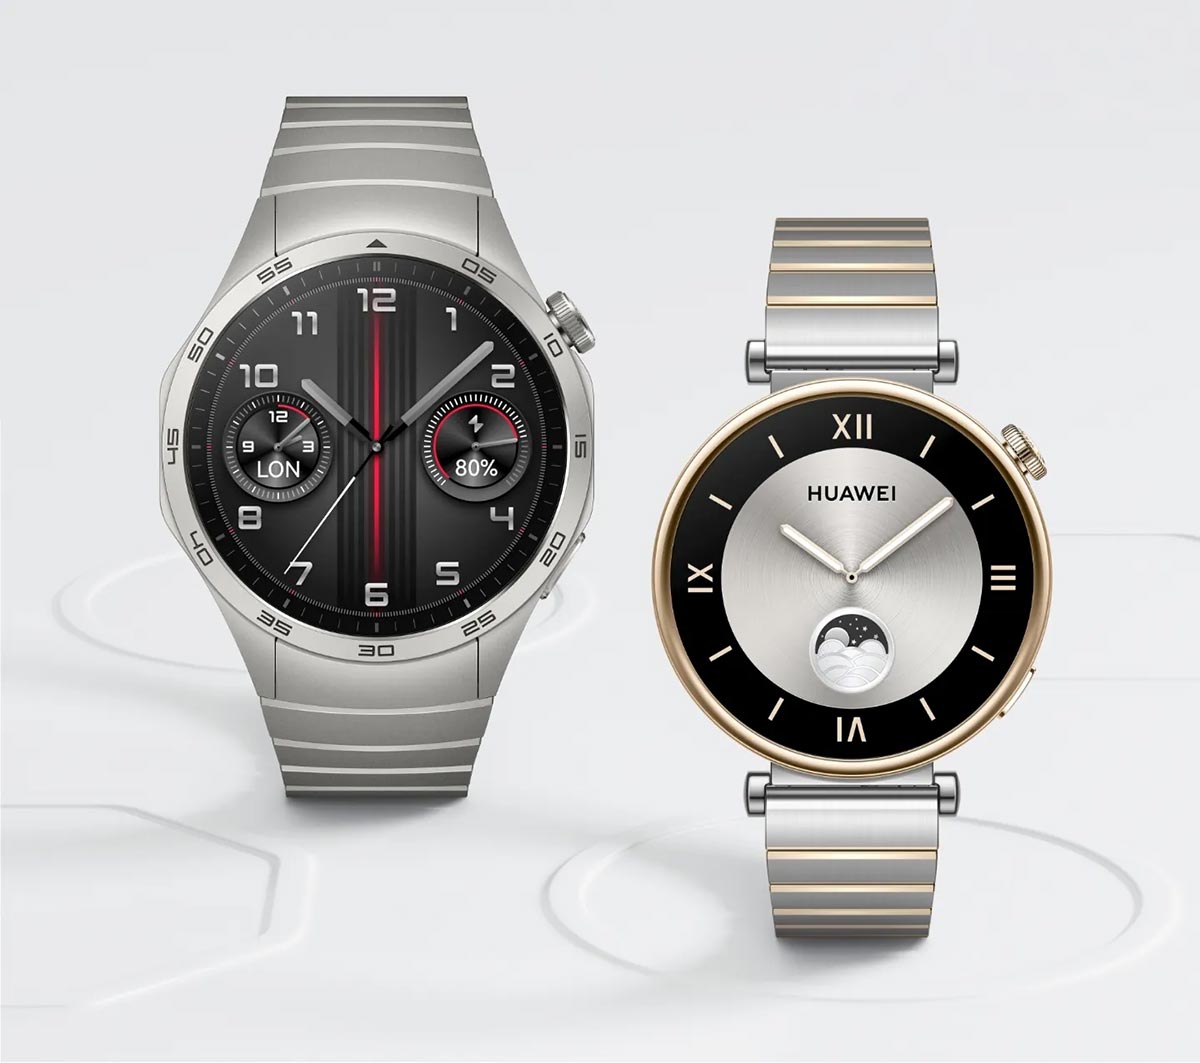 Health monitoring functions of the Huawei Watch GT 4